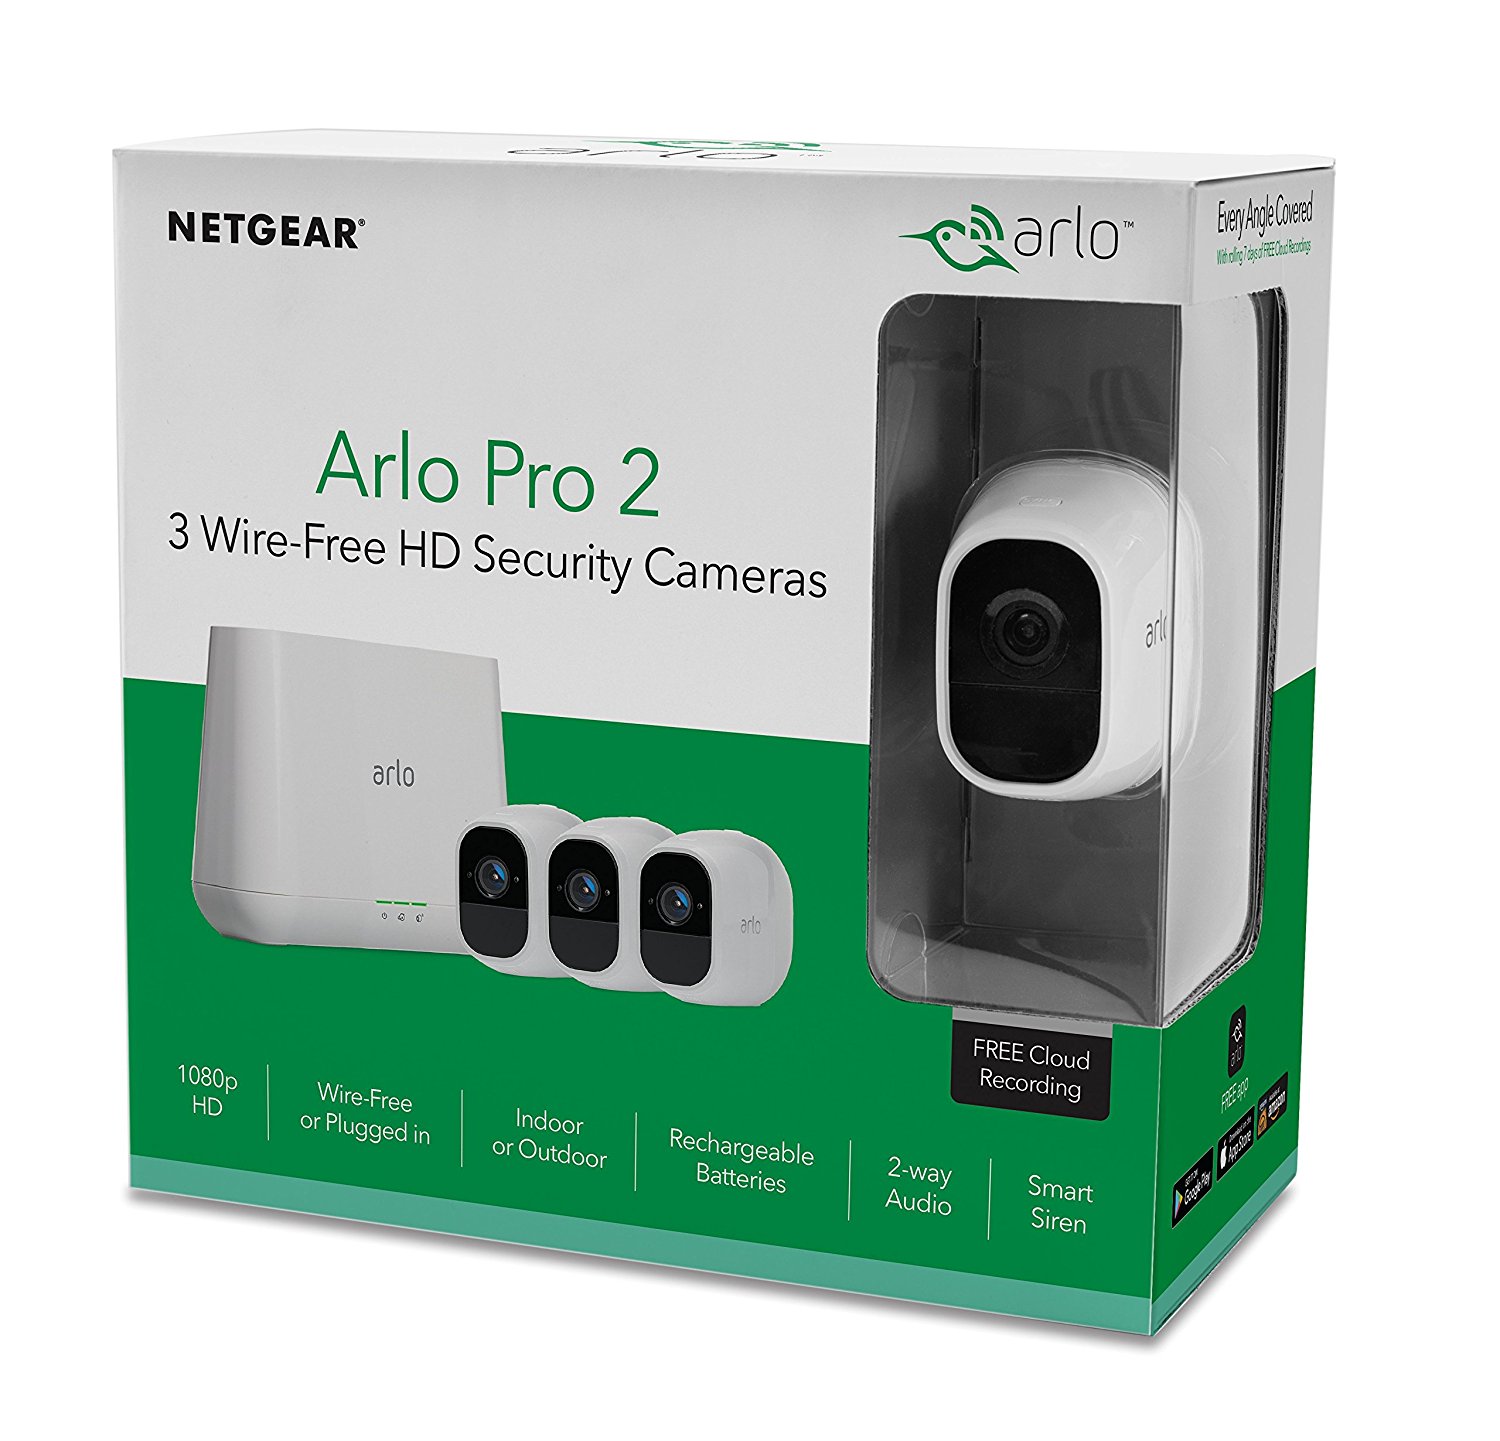 Arlo Pro 2 - 3 Wire-Free Camera 1080P HD Smart Security System (VMS4330P-100NAS) Motion Detection, Night Vision, Indoor/Outdoor, Two-Way Audio - image 1 of 9